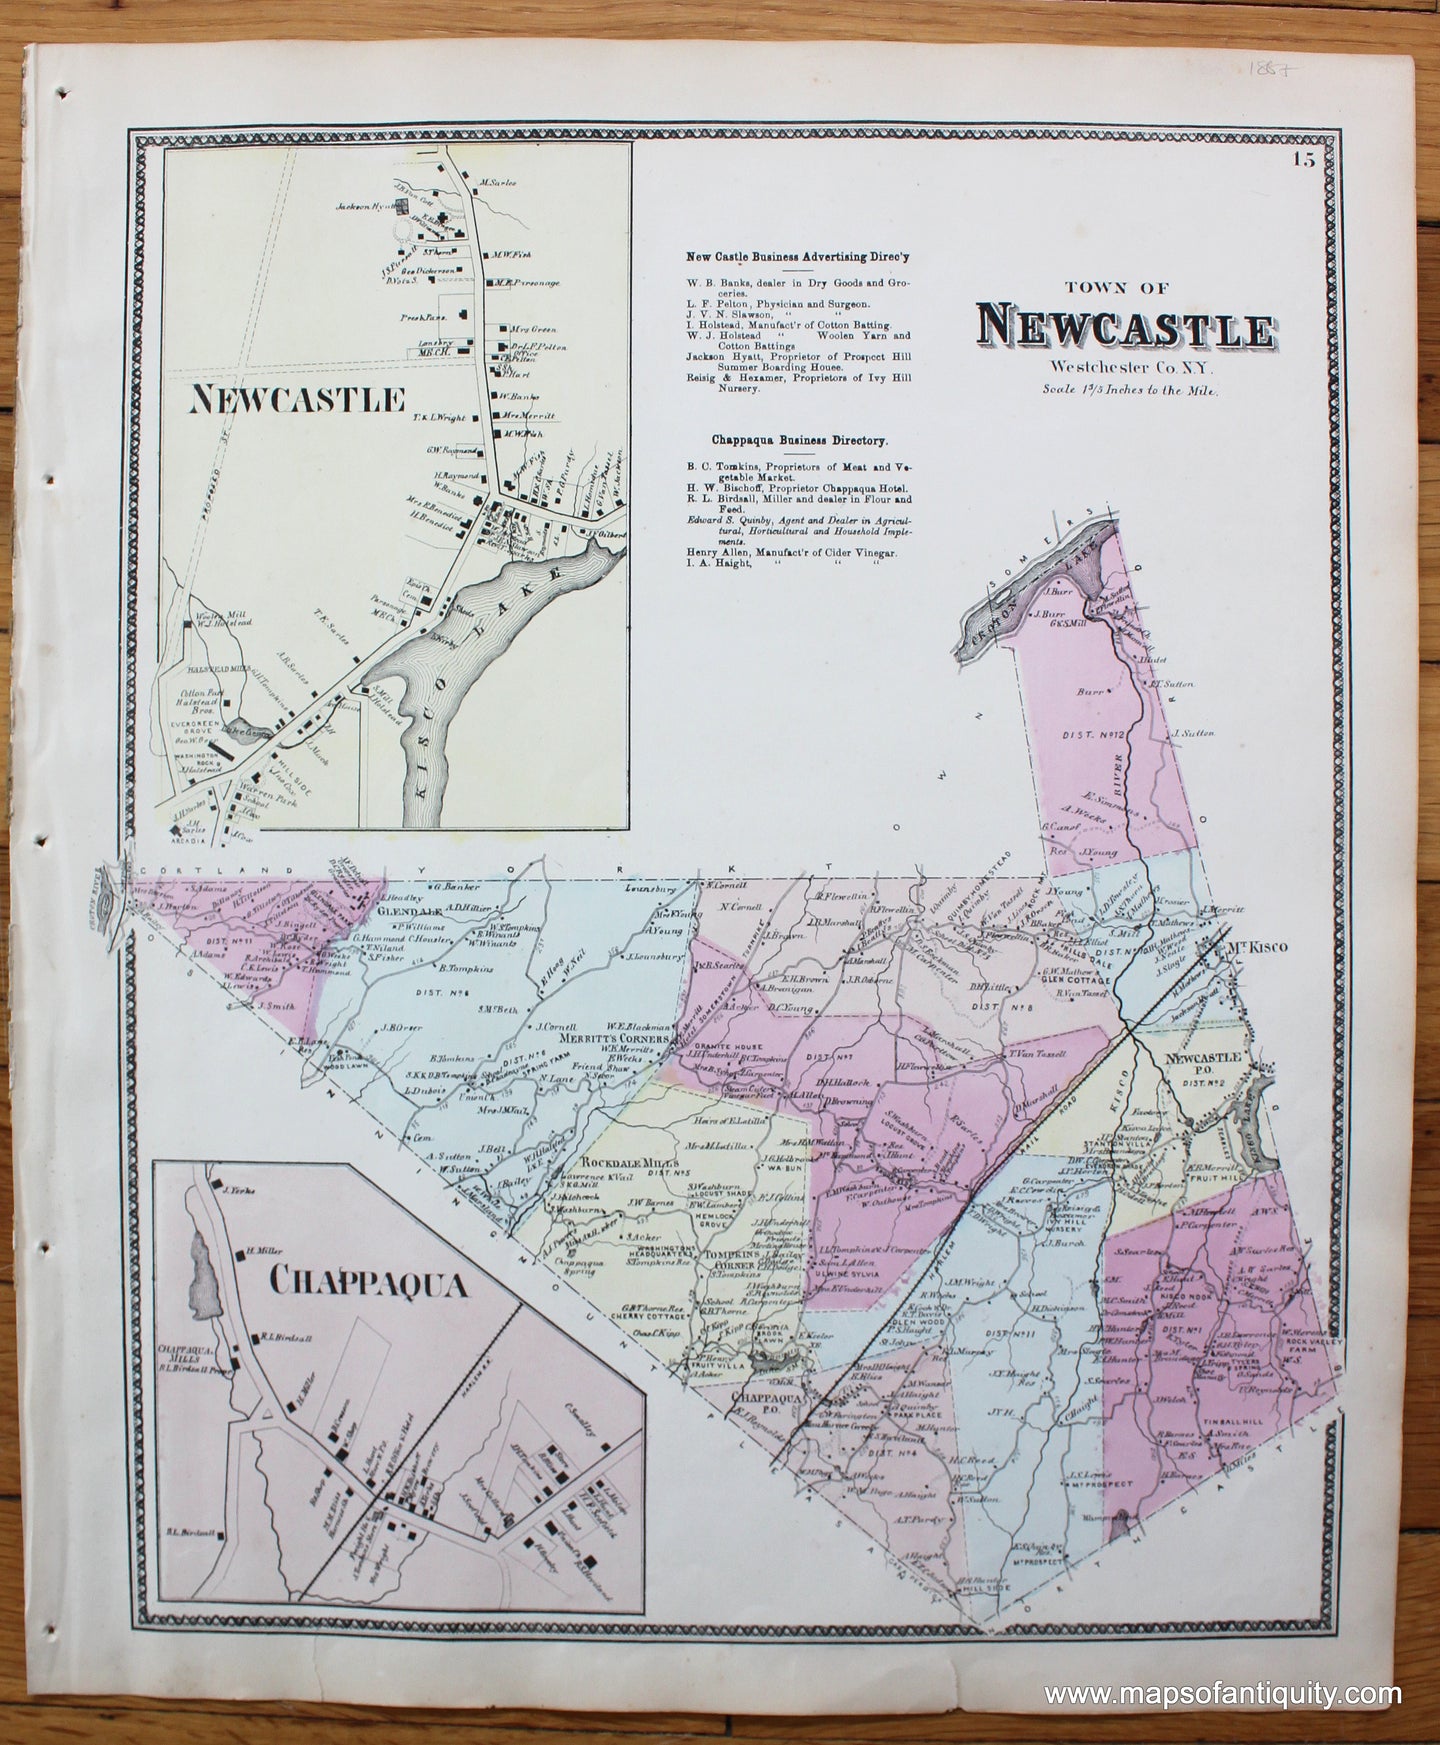 Antique-Map-Town-of-Newcastle-Westchester-Co.-N.Y.-(with-insets-of-Newcastle-near-Kisco-Lake-and-Chappaqua)